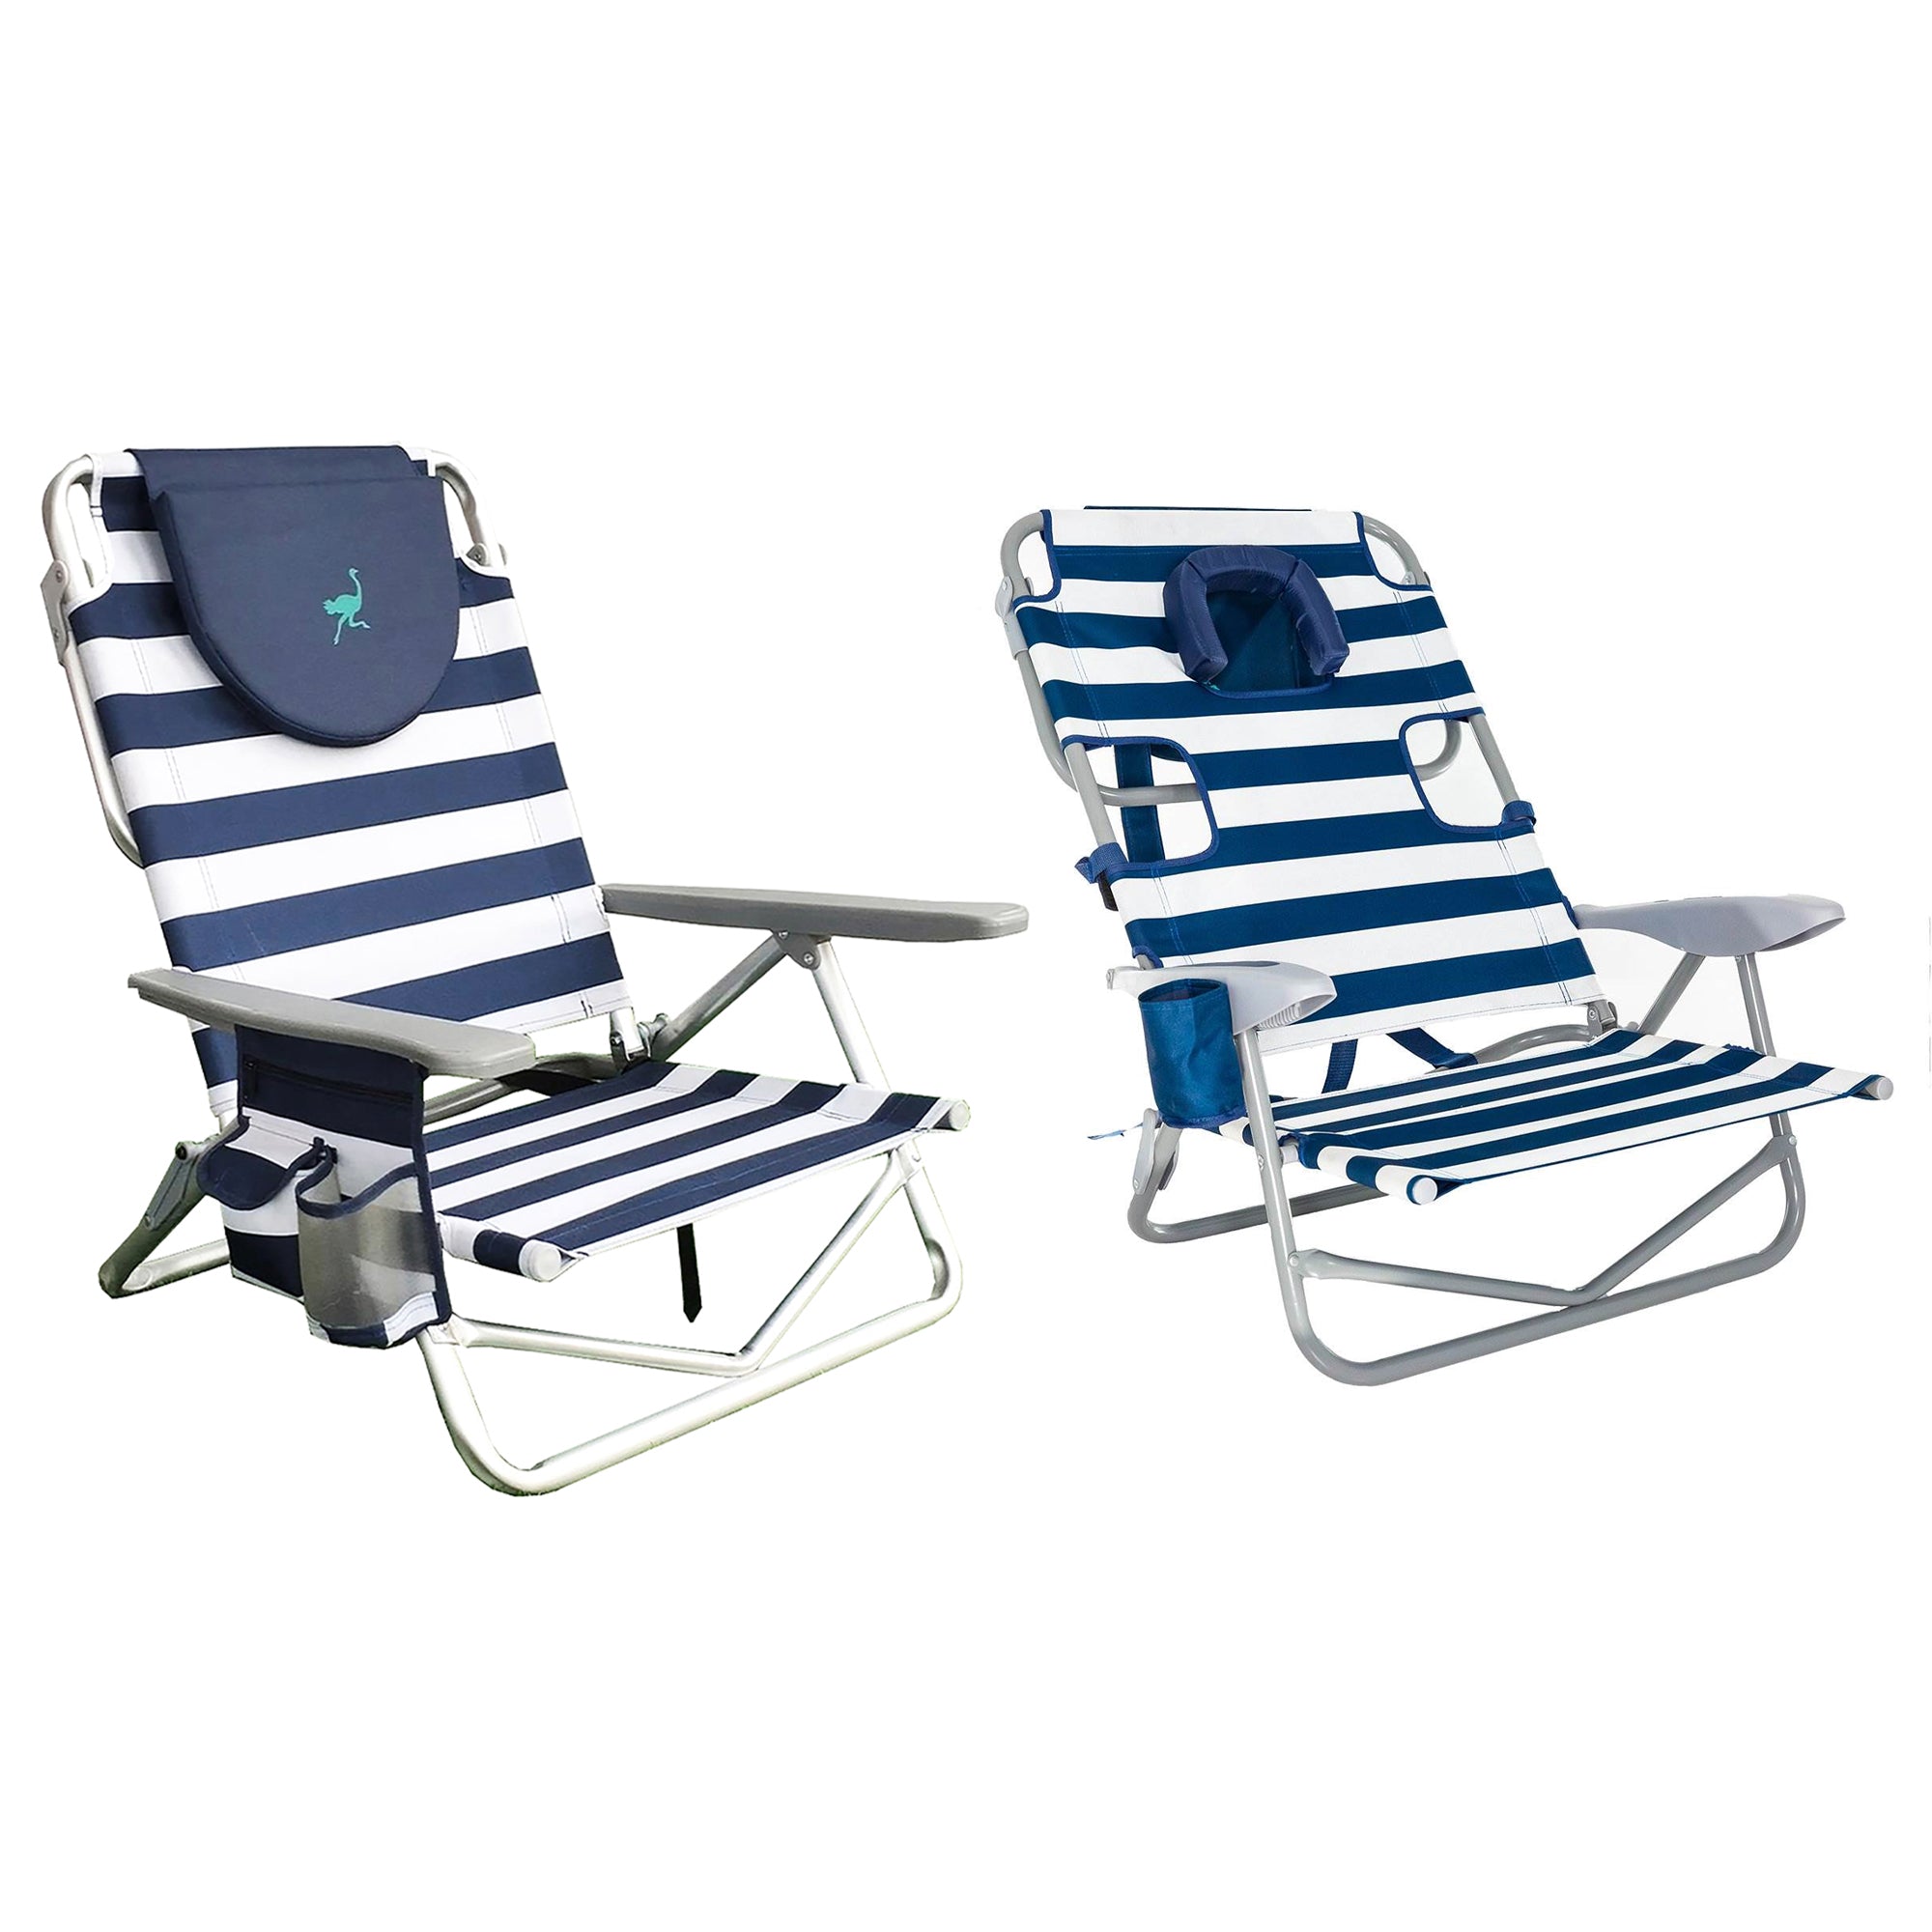 Ostrich-on-Your-Back-Sand-Chair-and-on-Your-Back-Sand-Beach-Chair,-Striped-Blue-Chairs-&-Seating